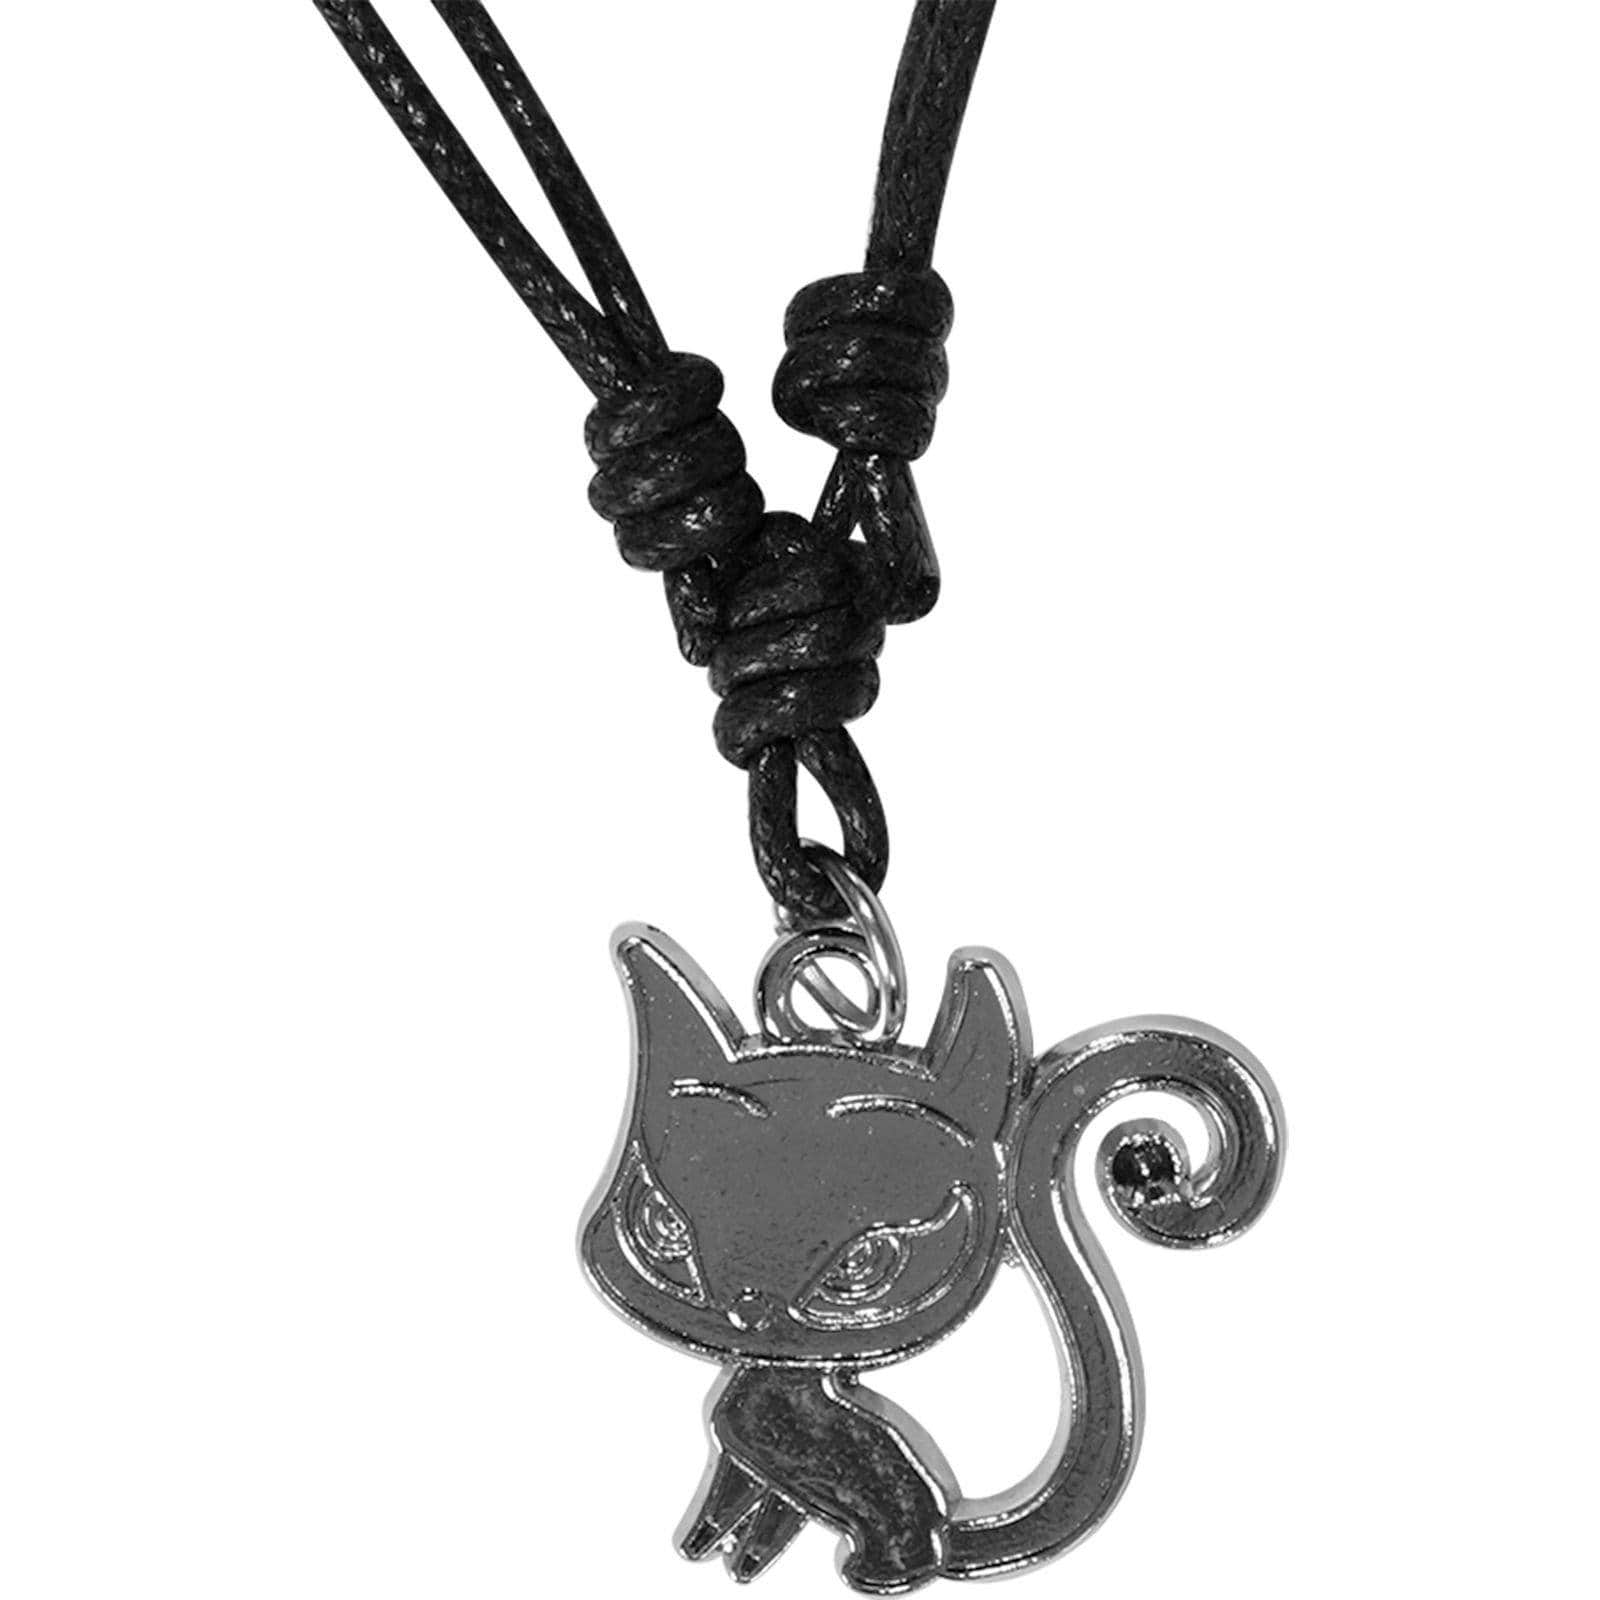 Silver Metal Cat Necklace Pendant Chain Womens Girls Childrens Kids Jewellery